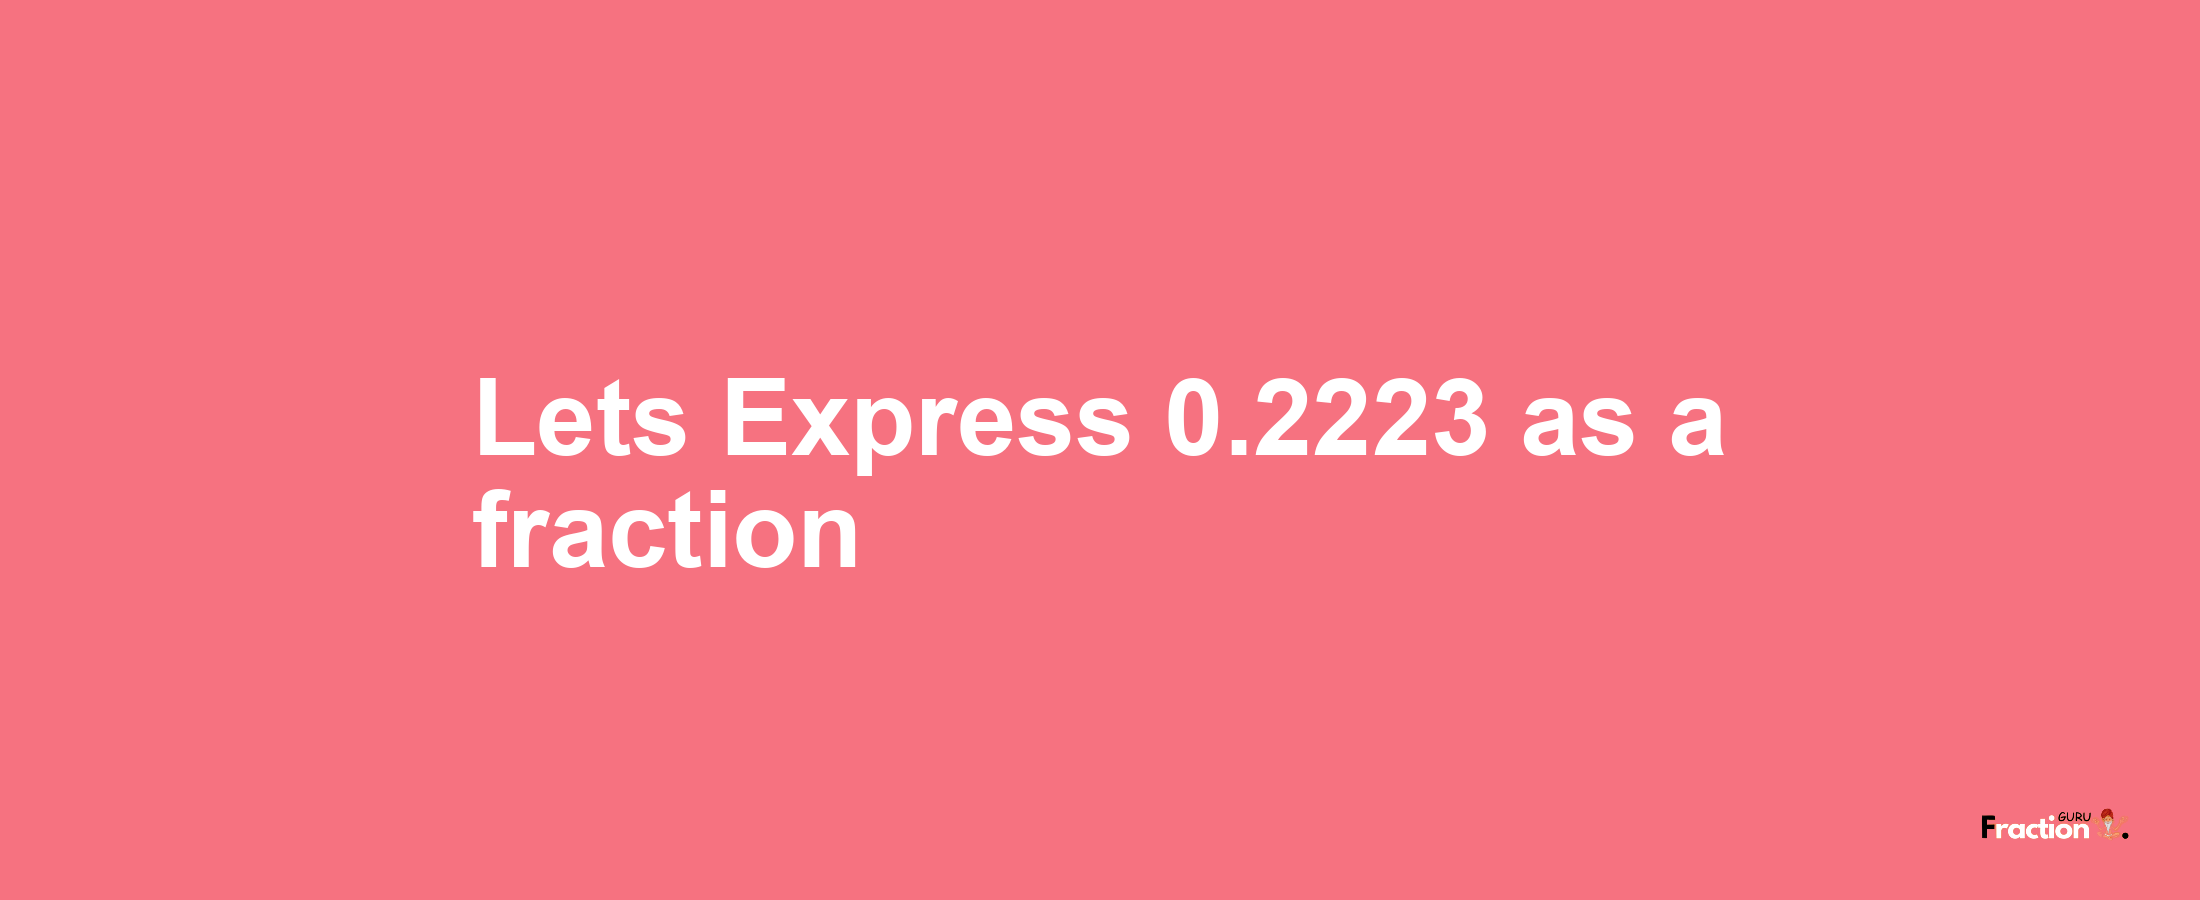 Lets Express 0.2223 as afraction